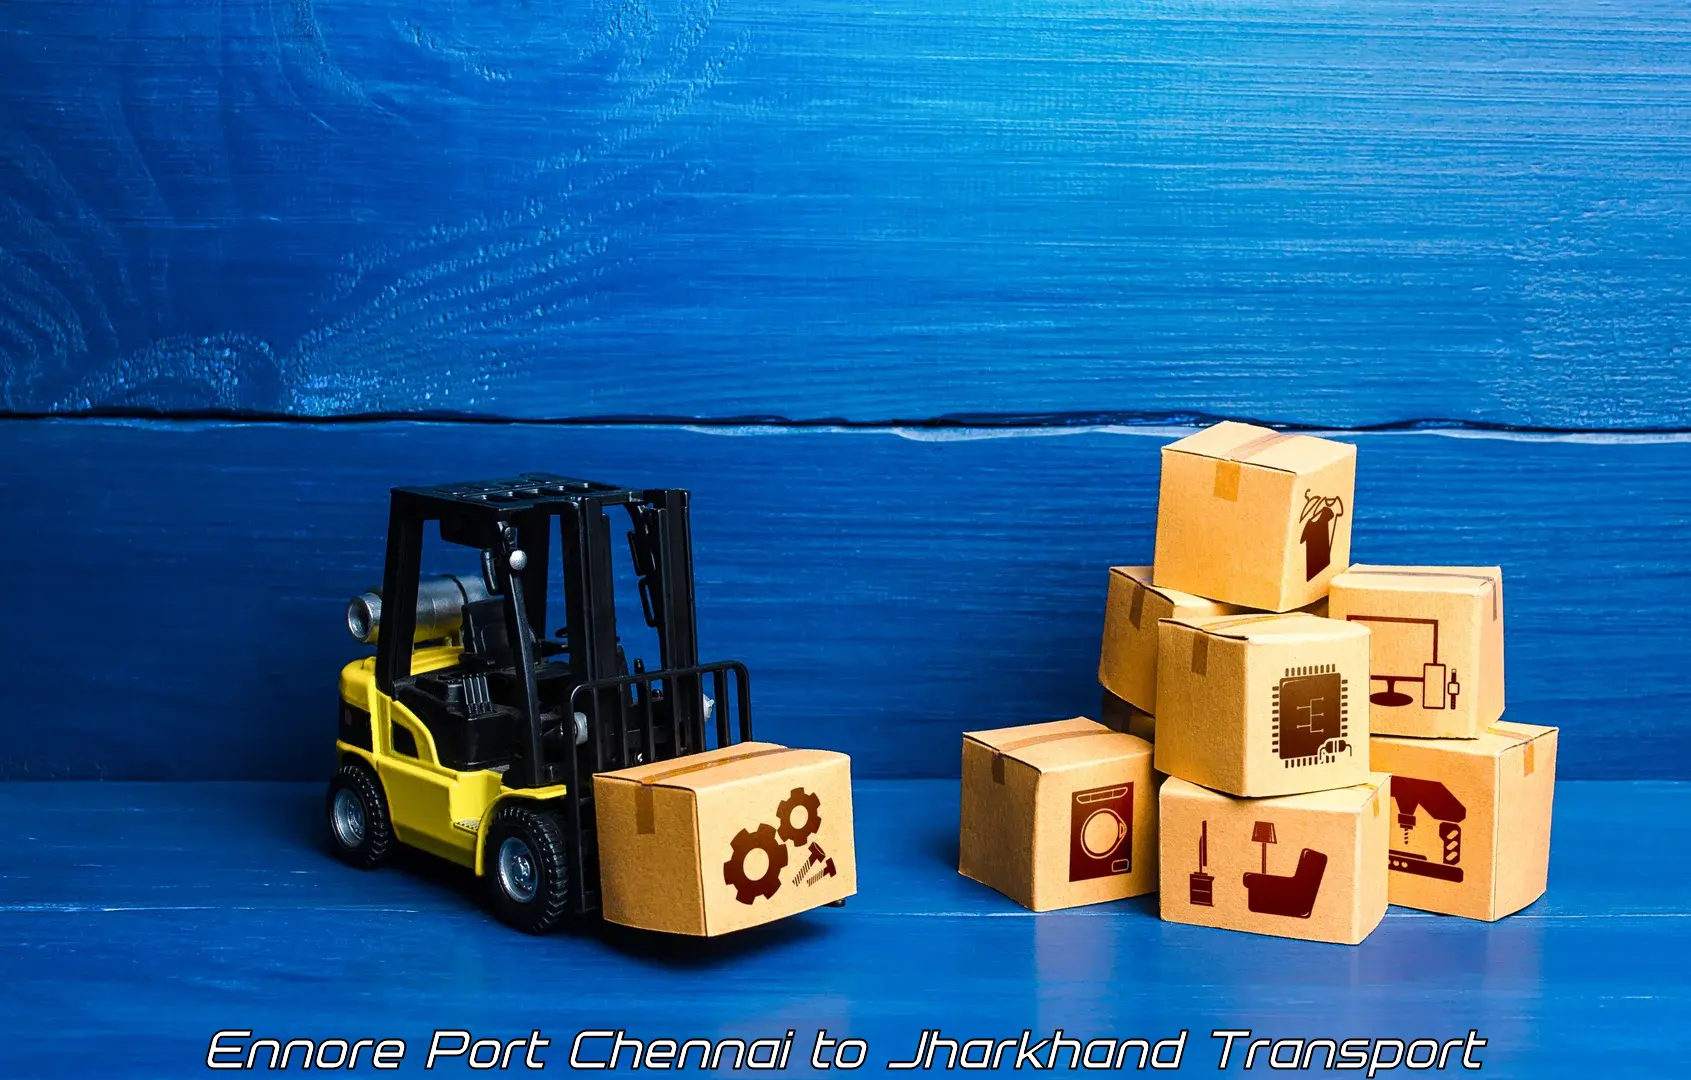 Two wheeler parcel service in Ennore Port Chennai to Chandil